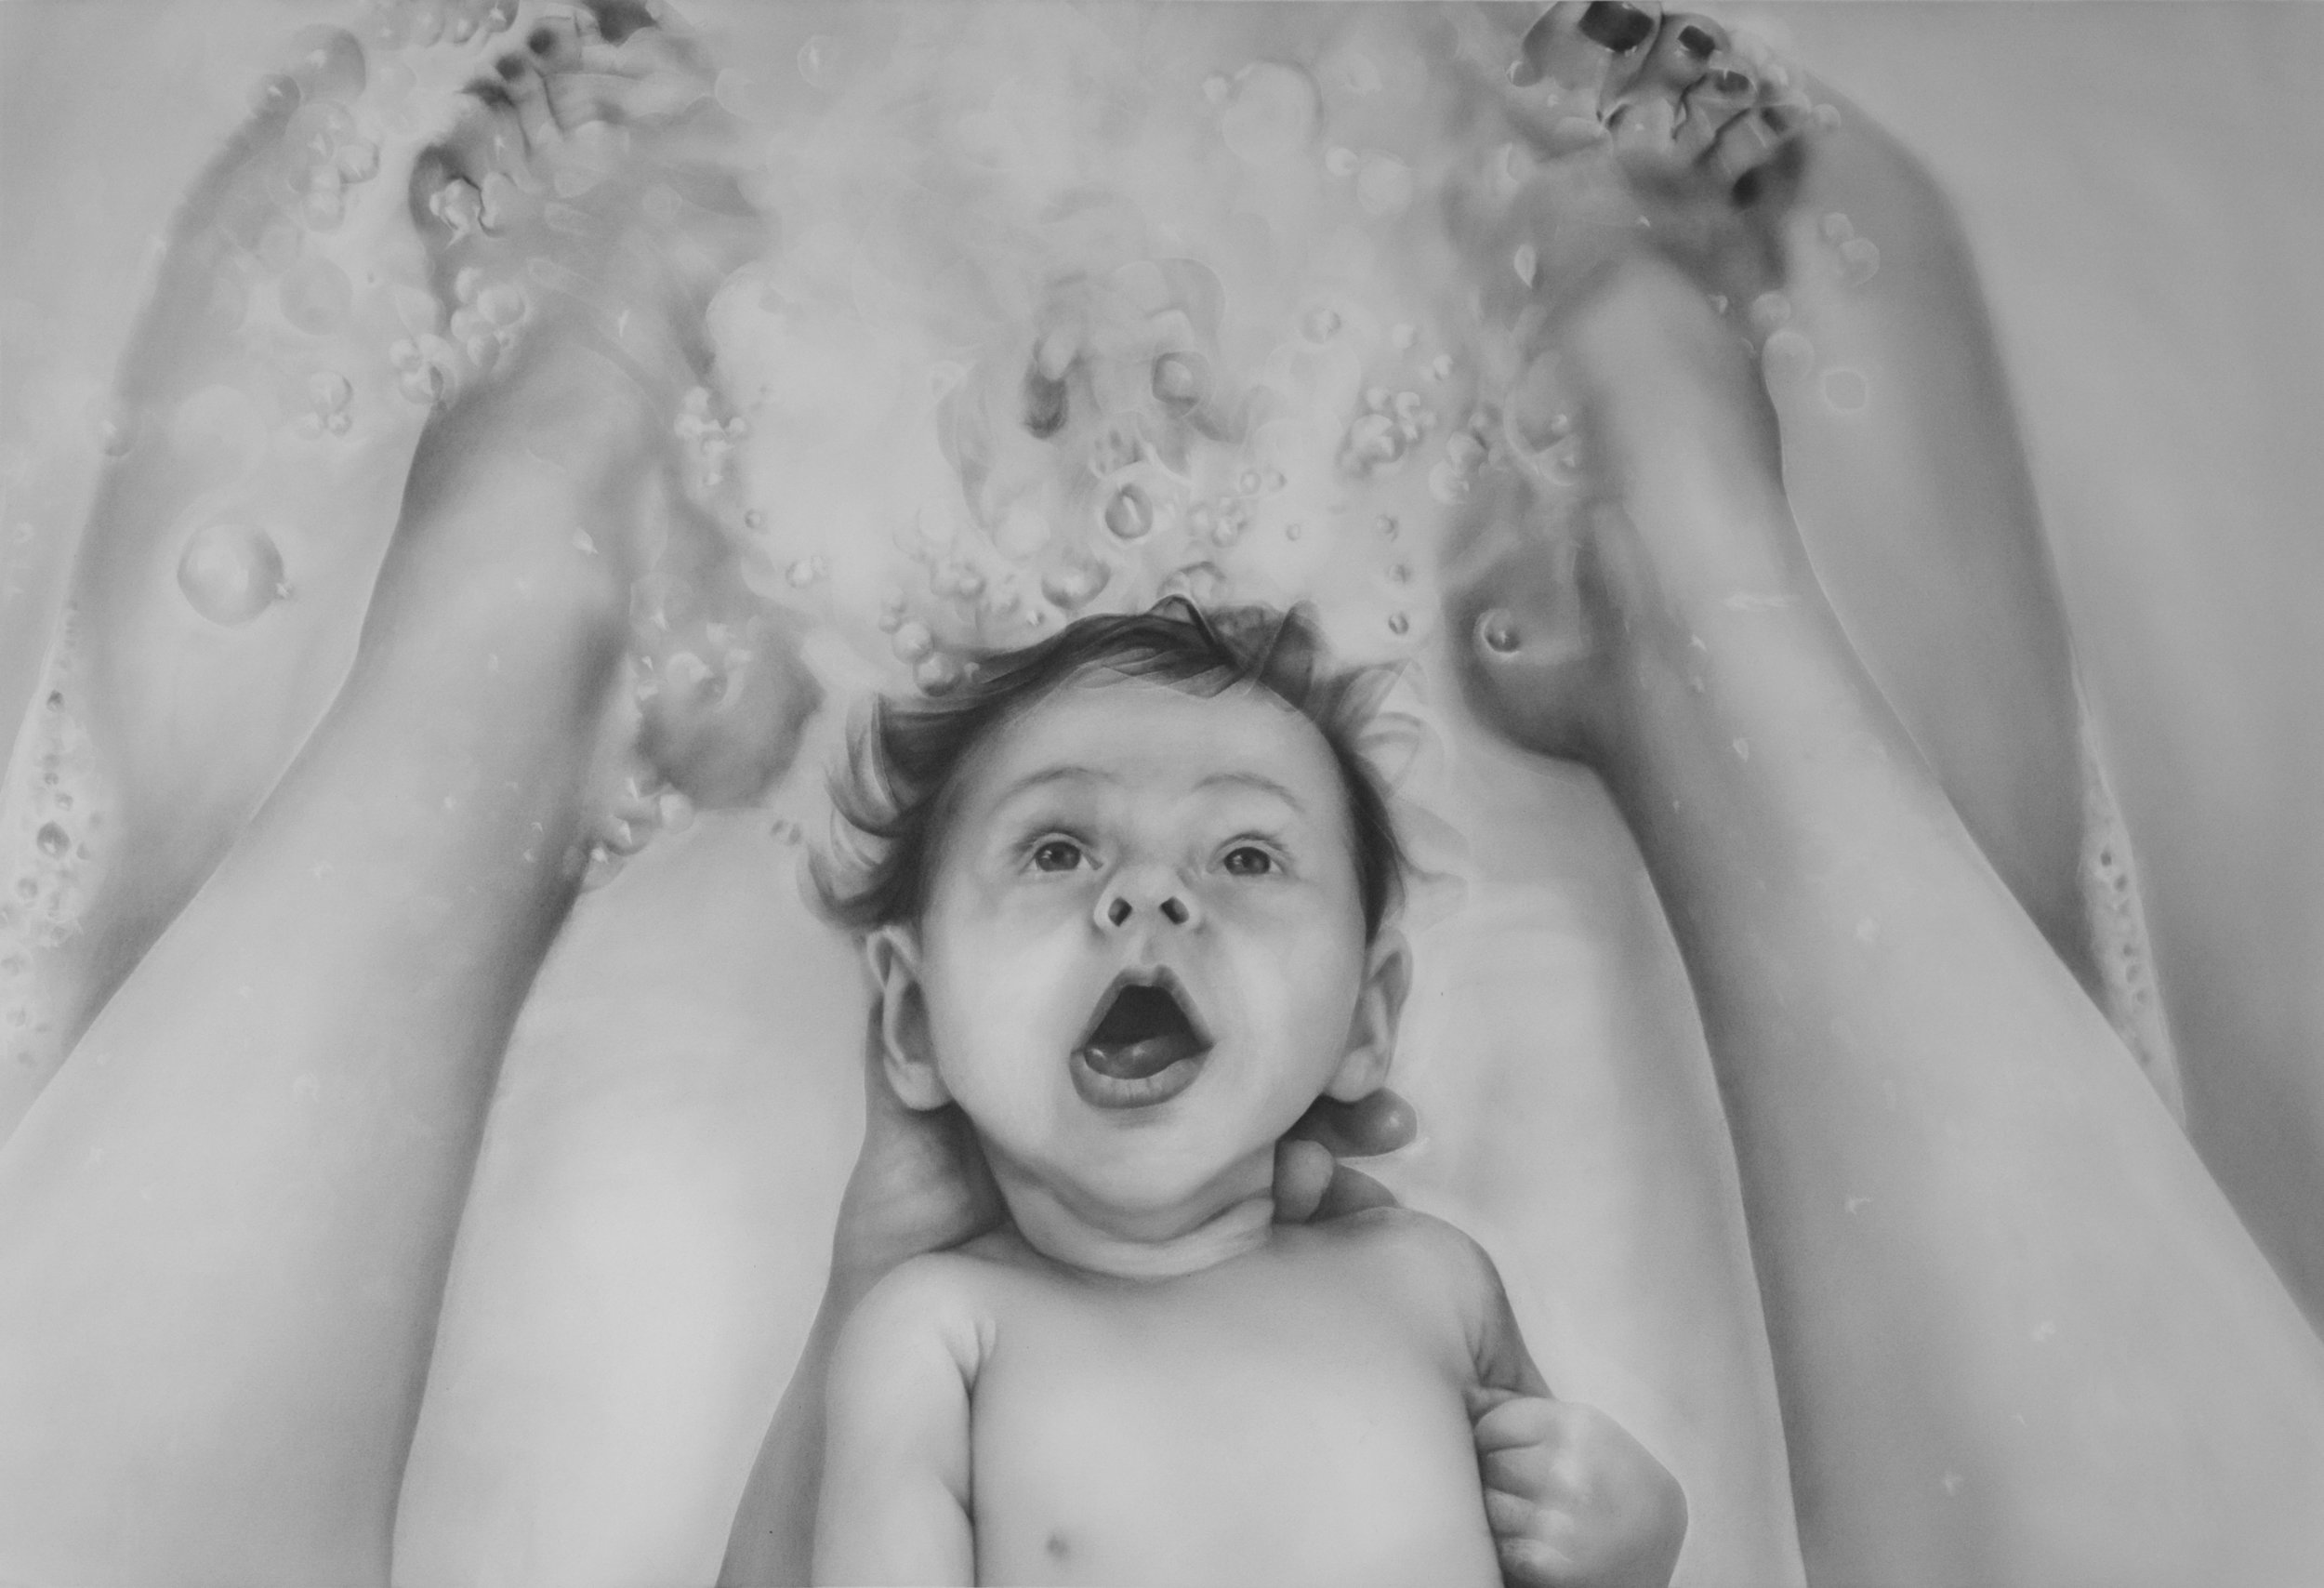 Mom and baby bathing together - graphite pencil drawing - ultra realistic - melissa cooke - inspirationala